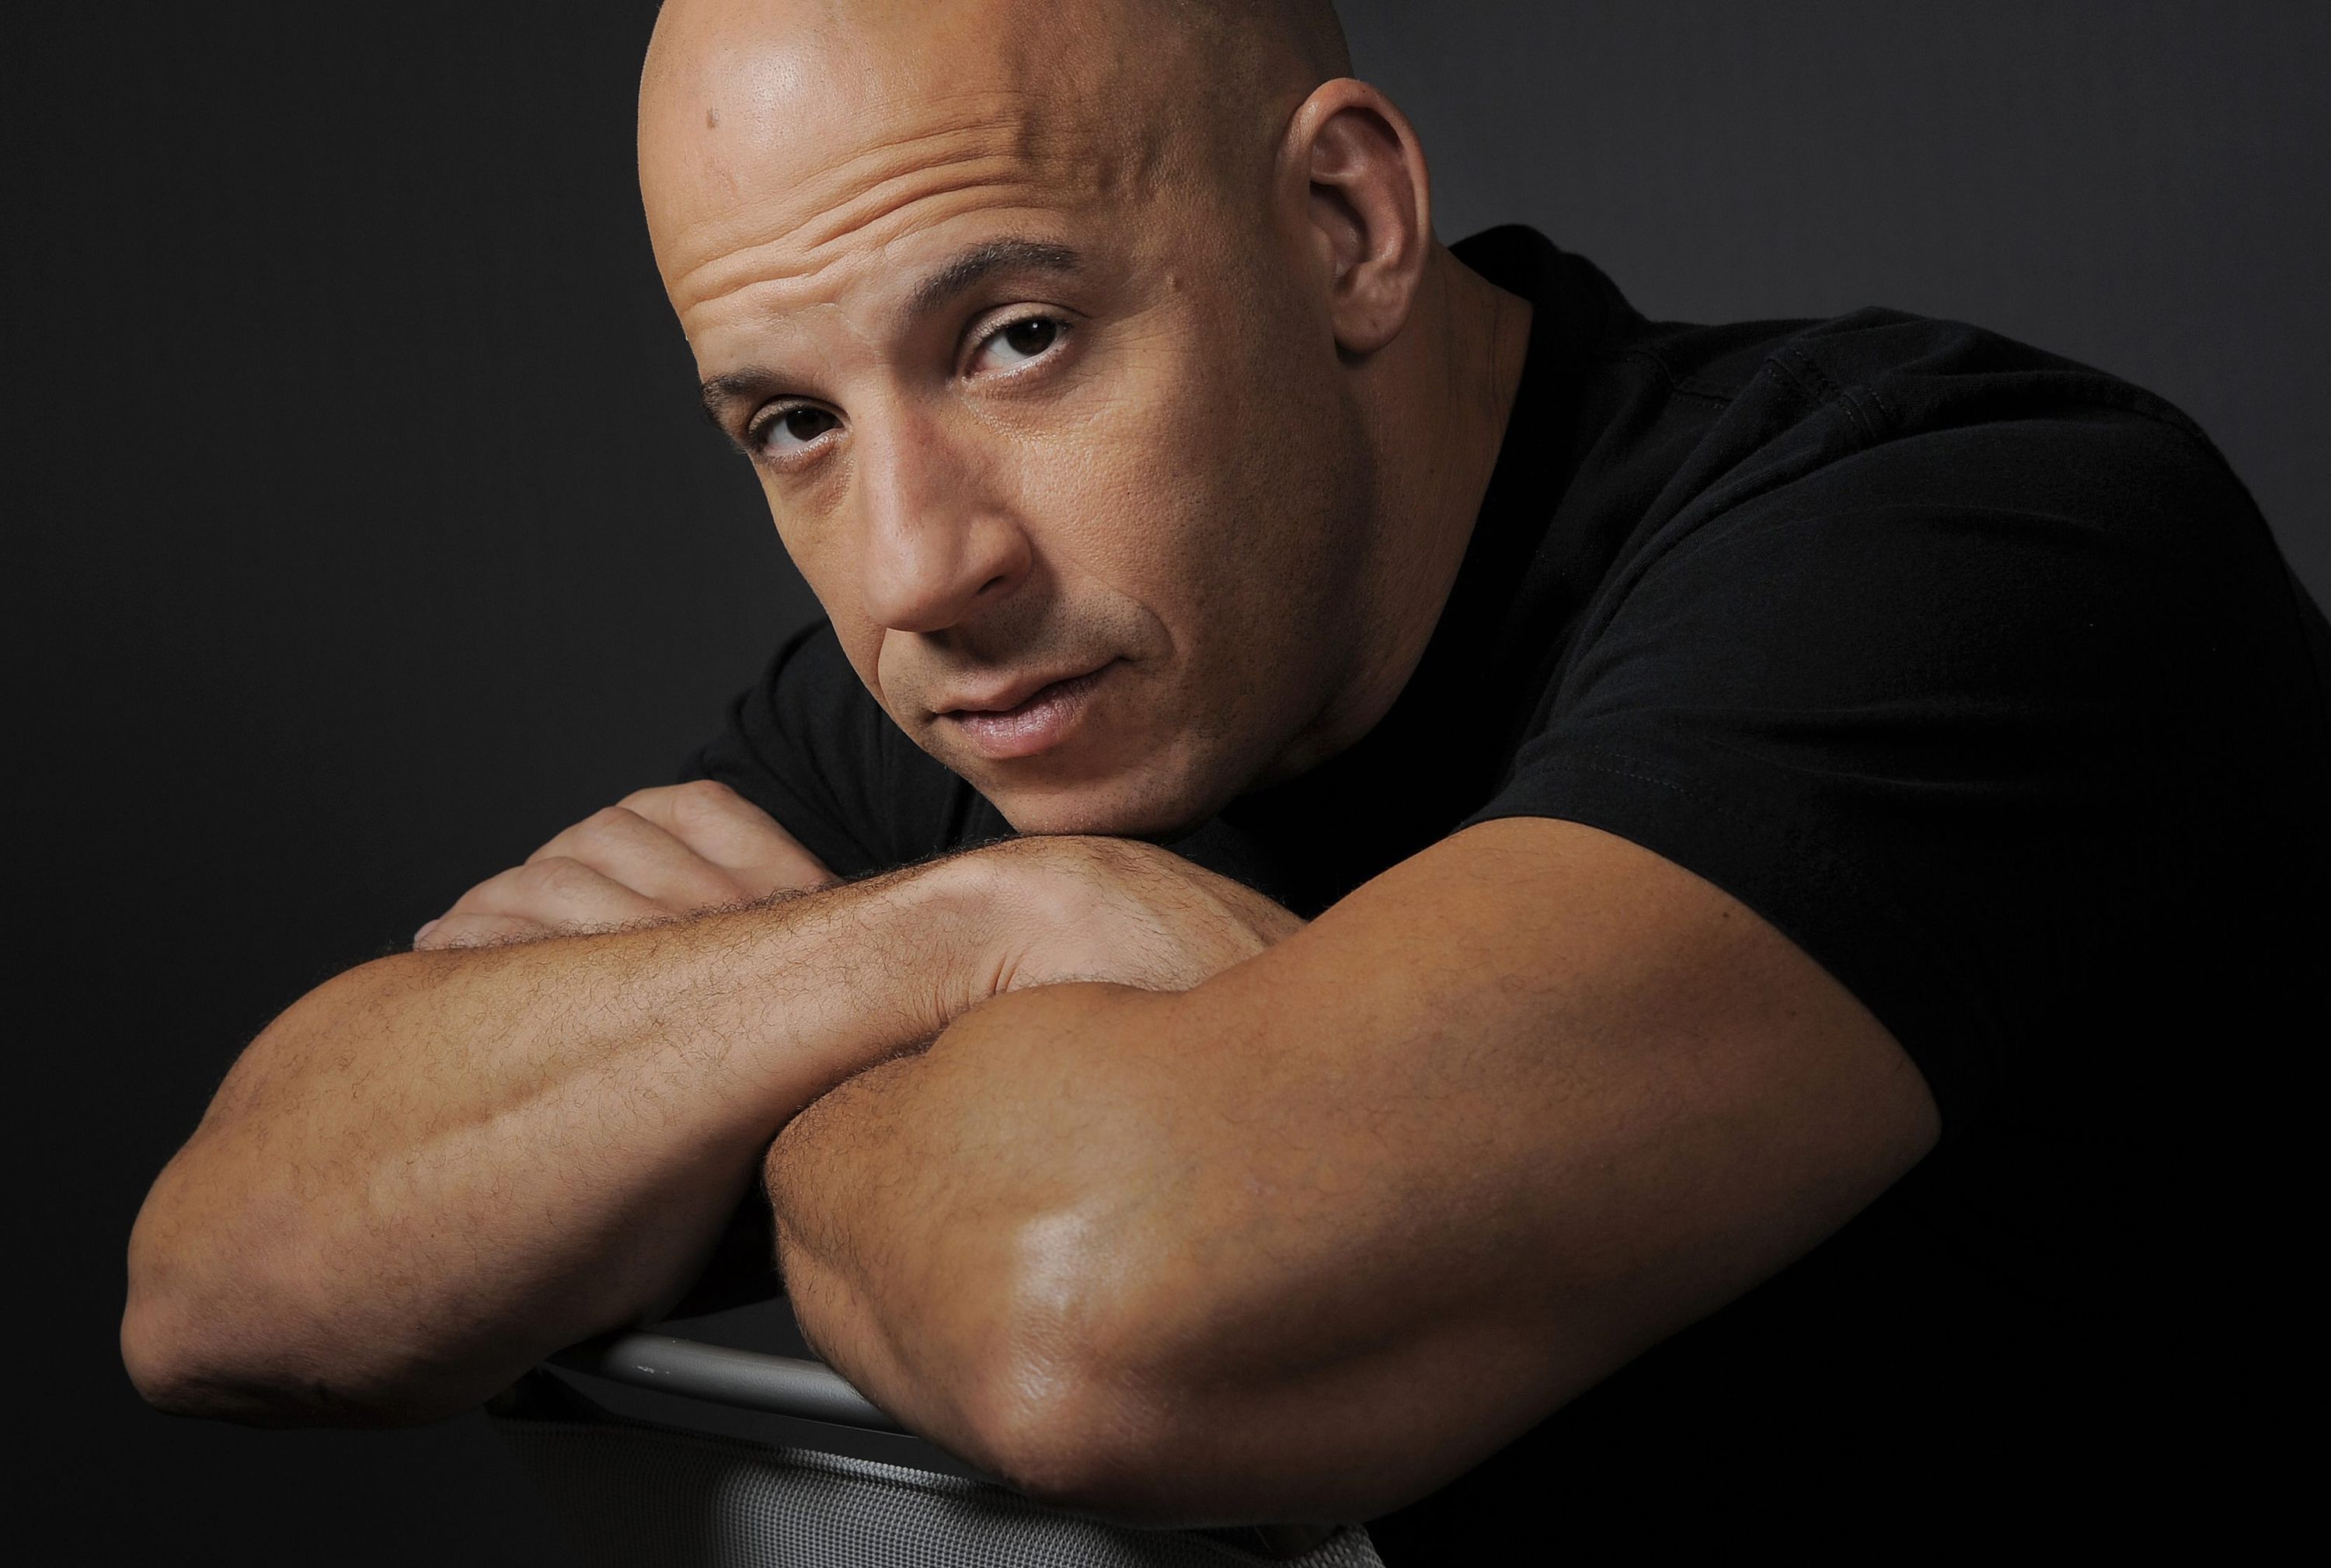 Vin Diesel posts video of himself and (possibly) Paul Walker playing World  of Warcraft